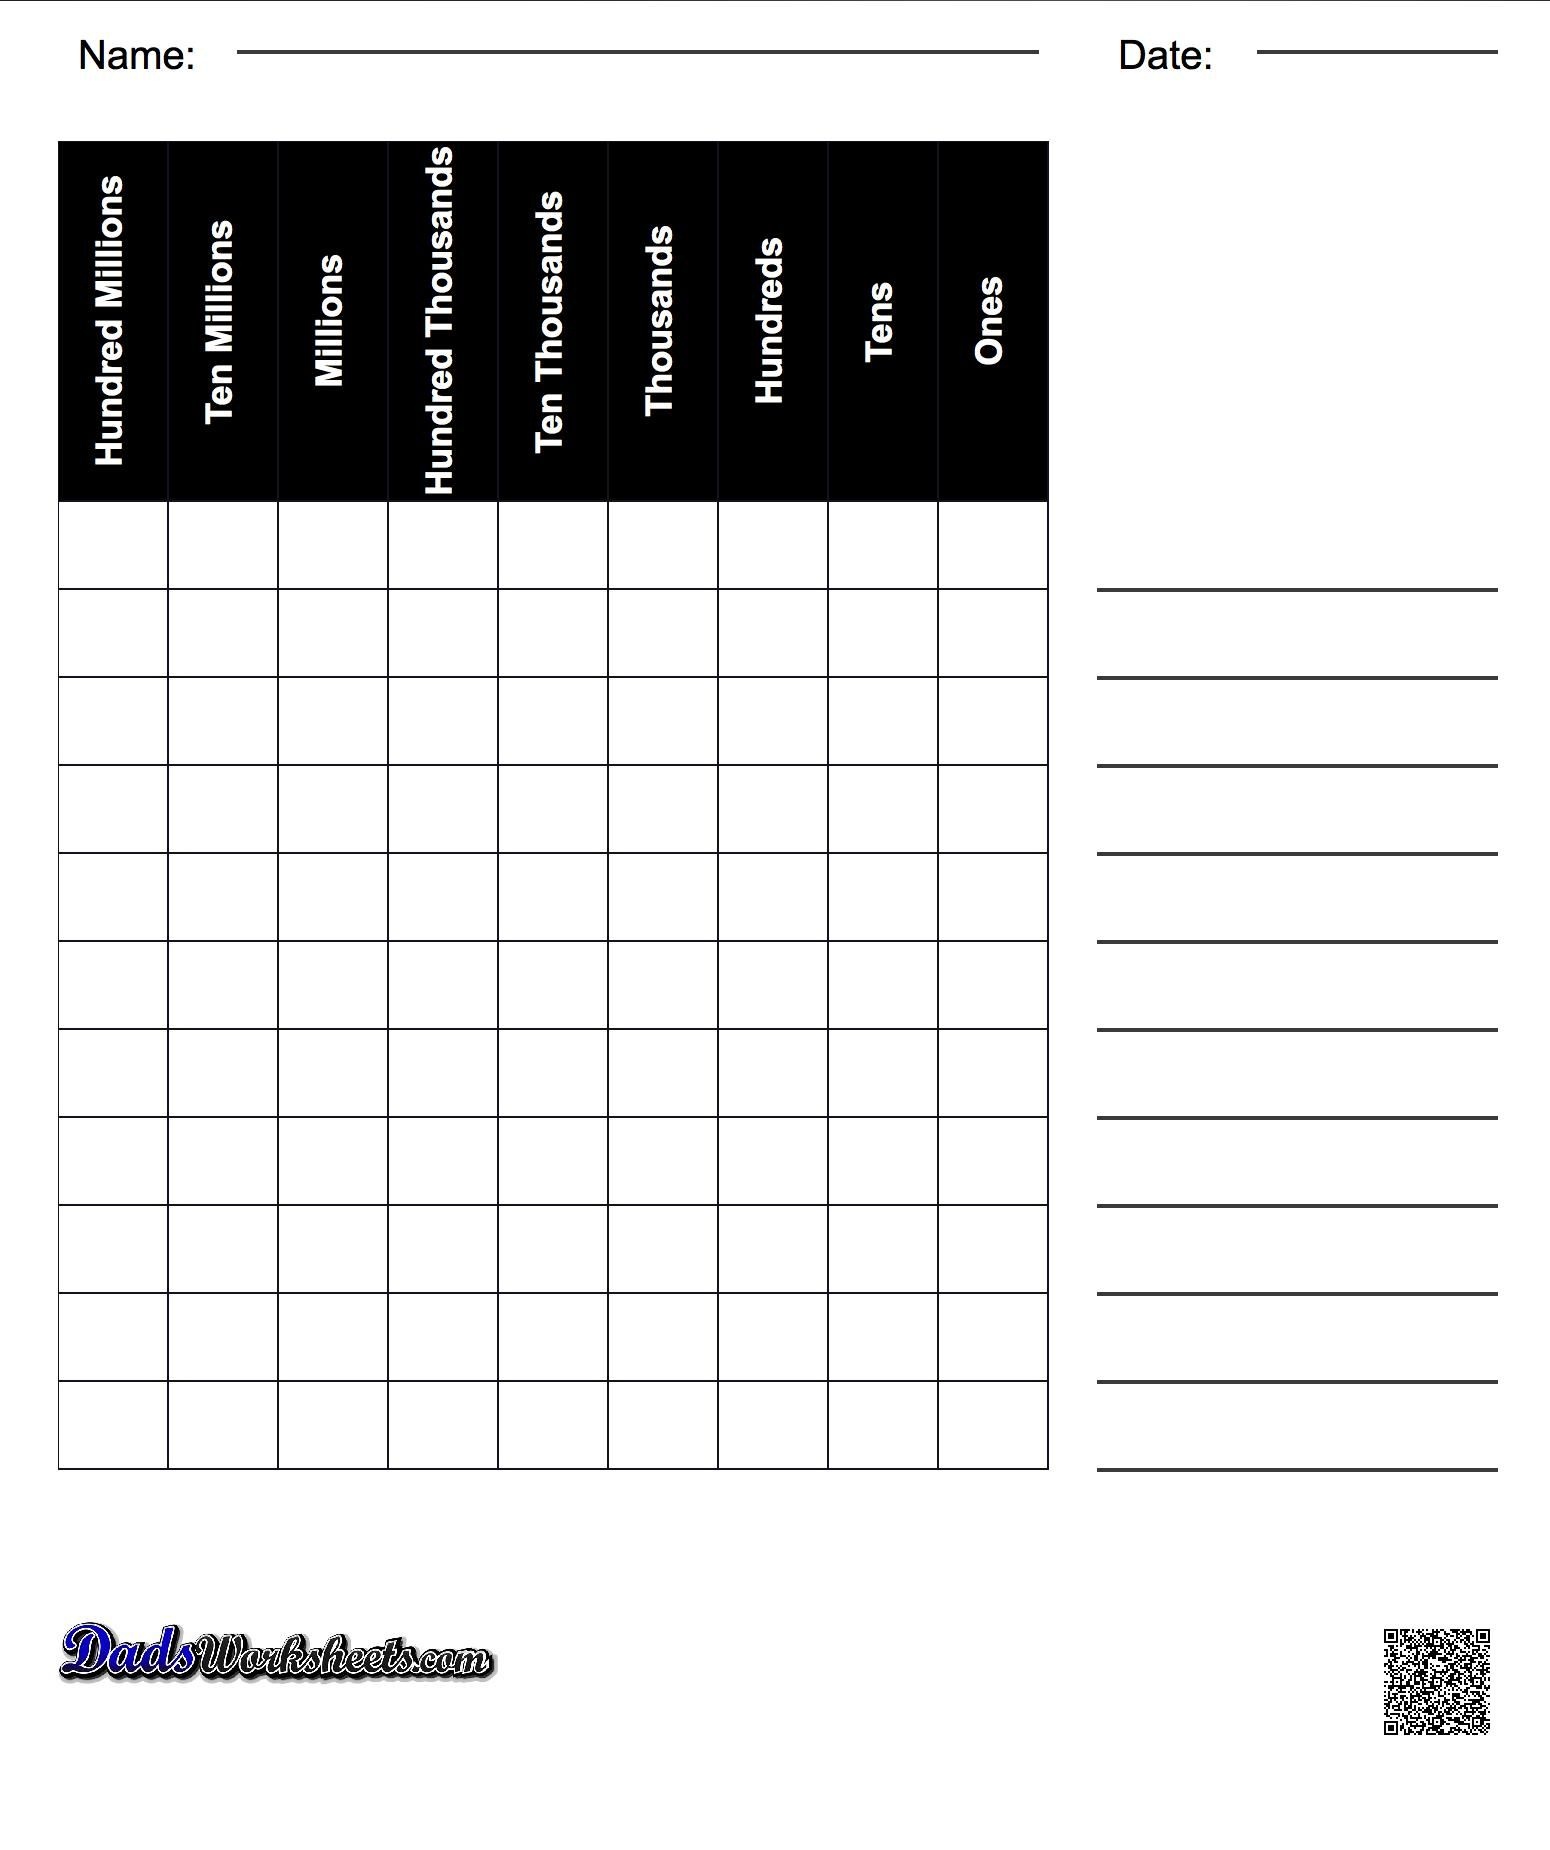 Printable Place Value Chart In Basic Black And White Grid | Math - Free Printable Place Value Chart